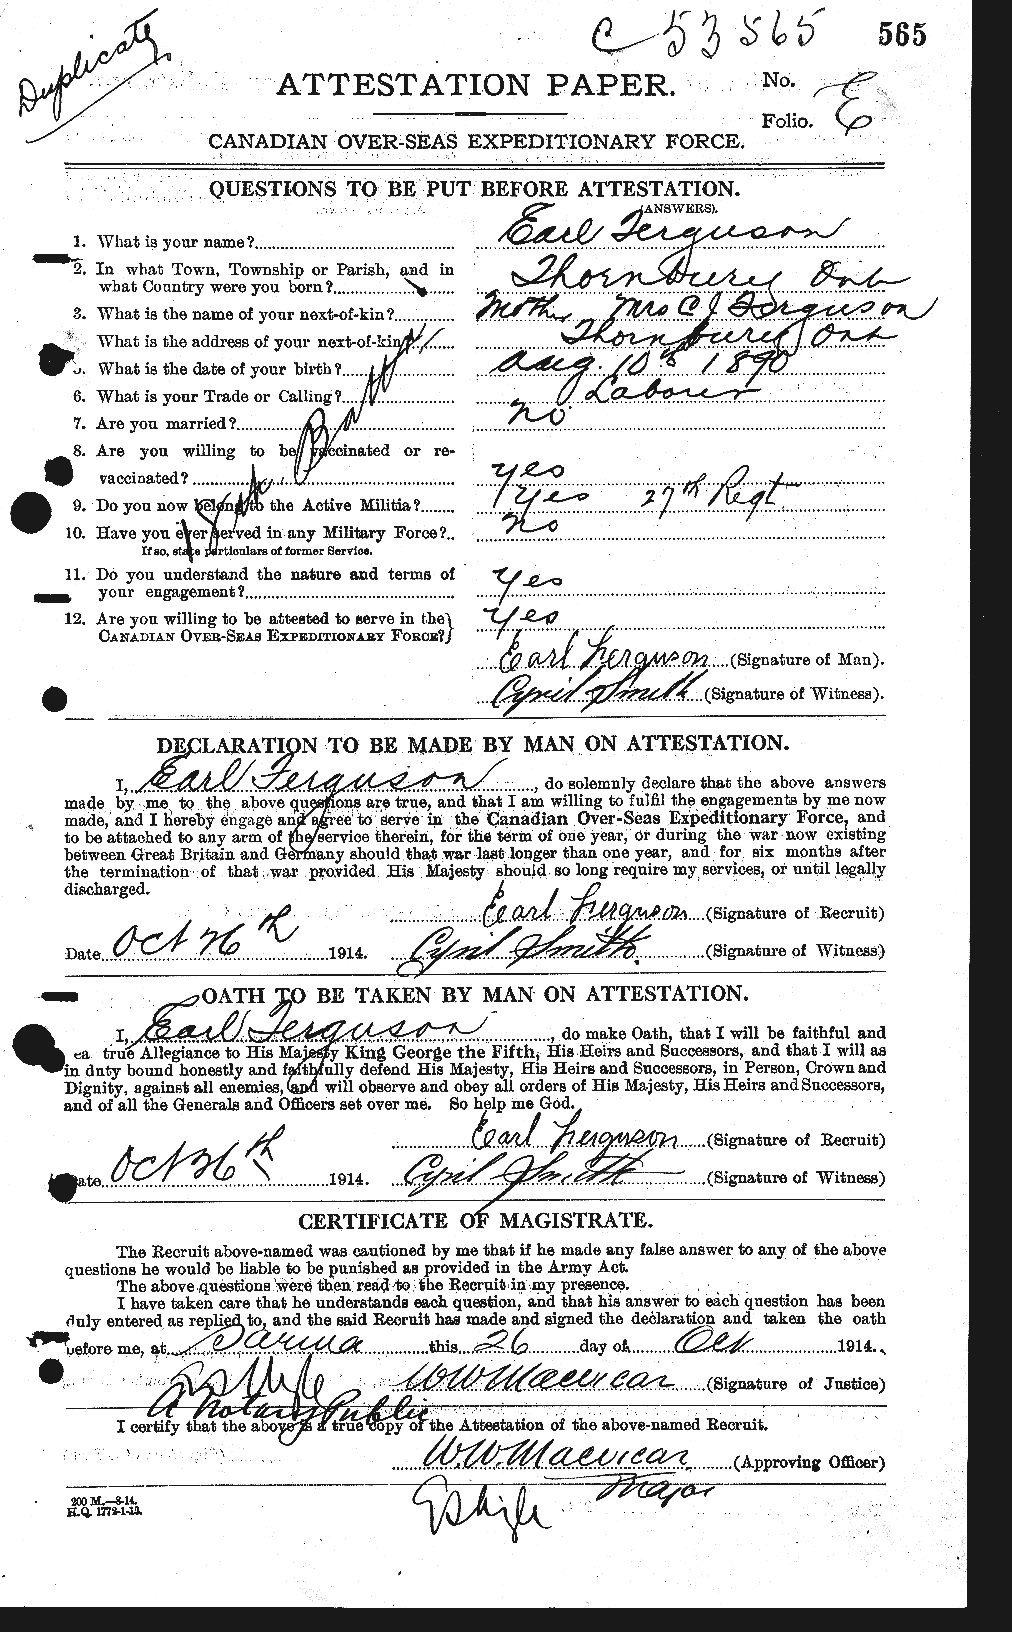 Personnel Records of the First World War - CEF 319035a